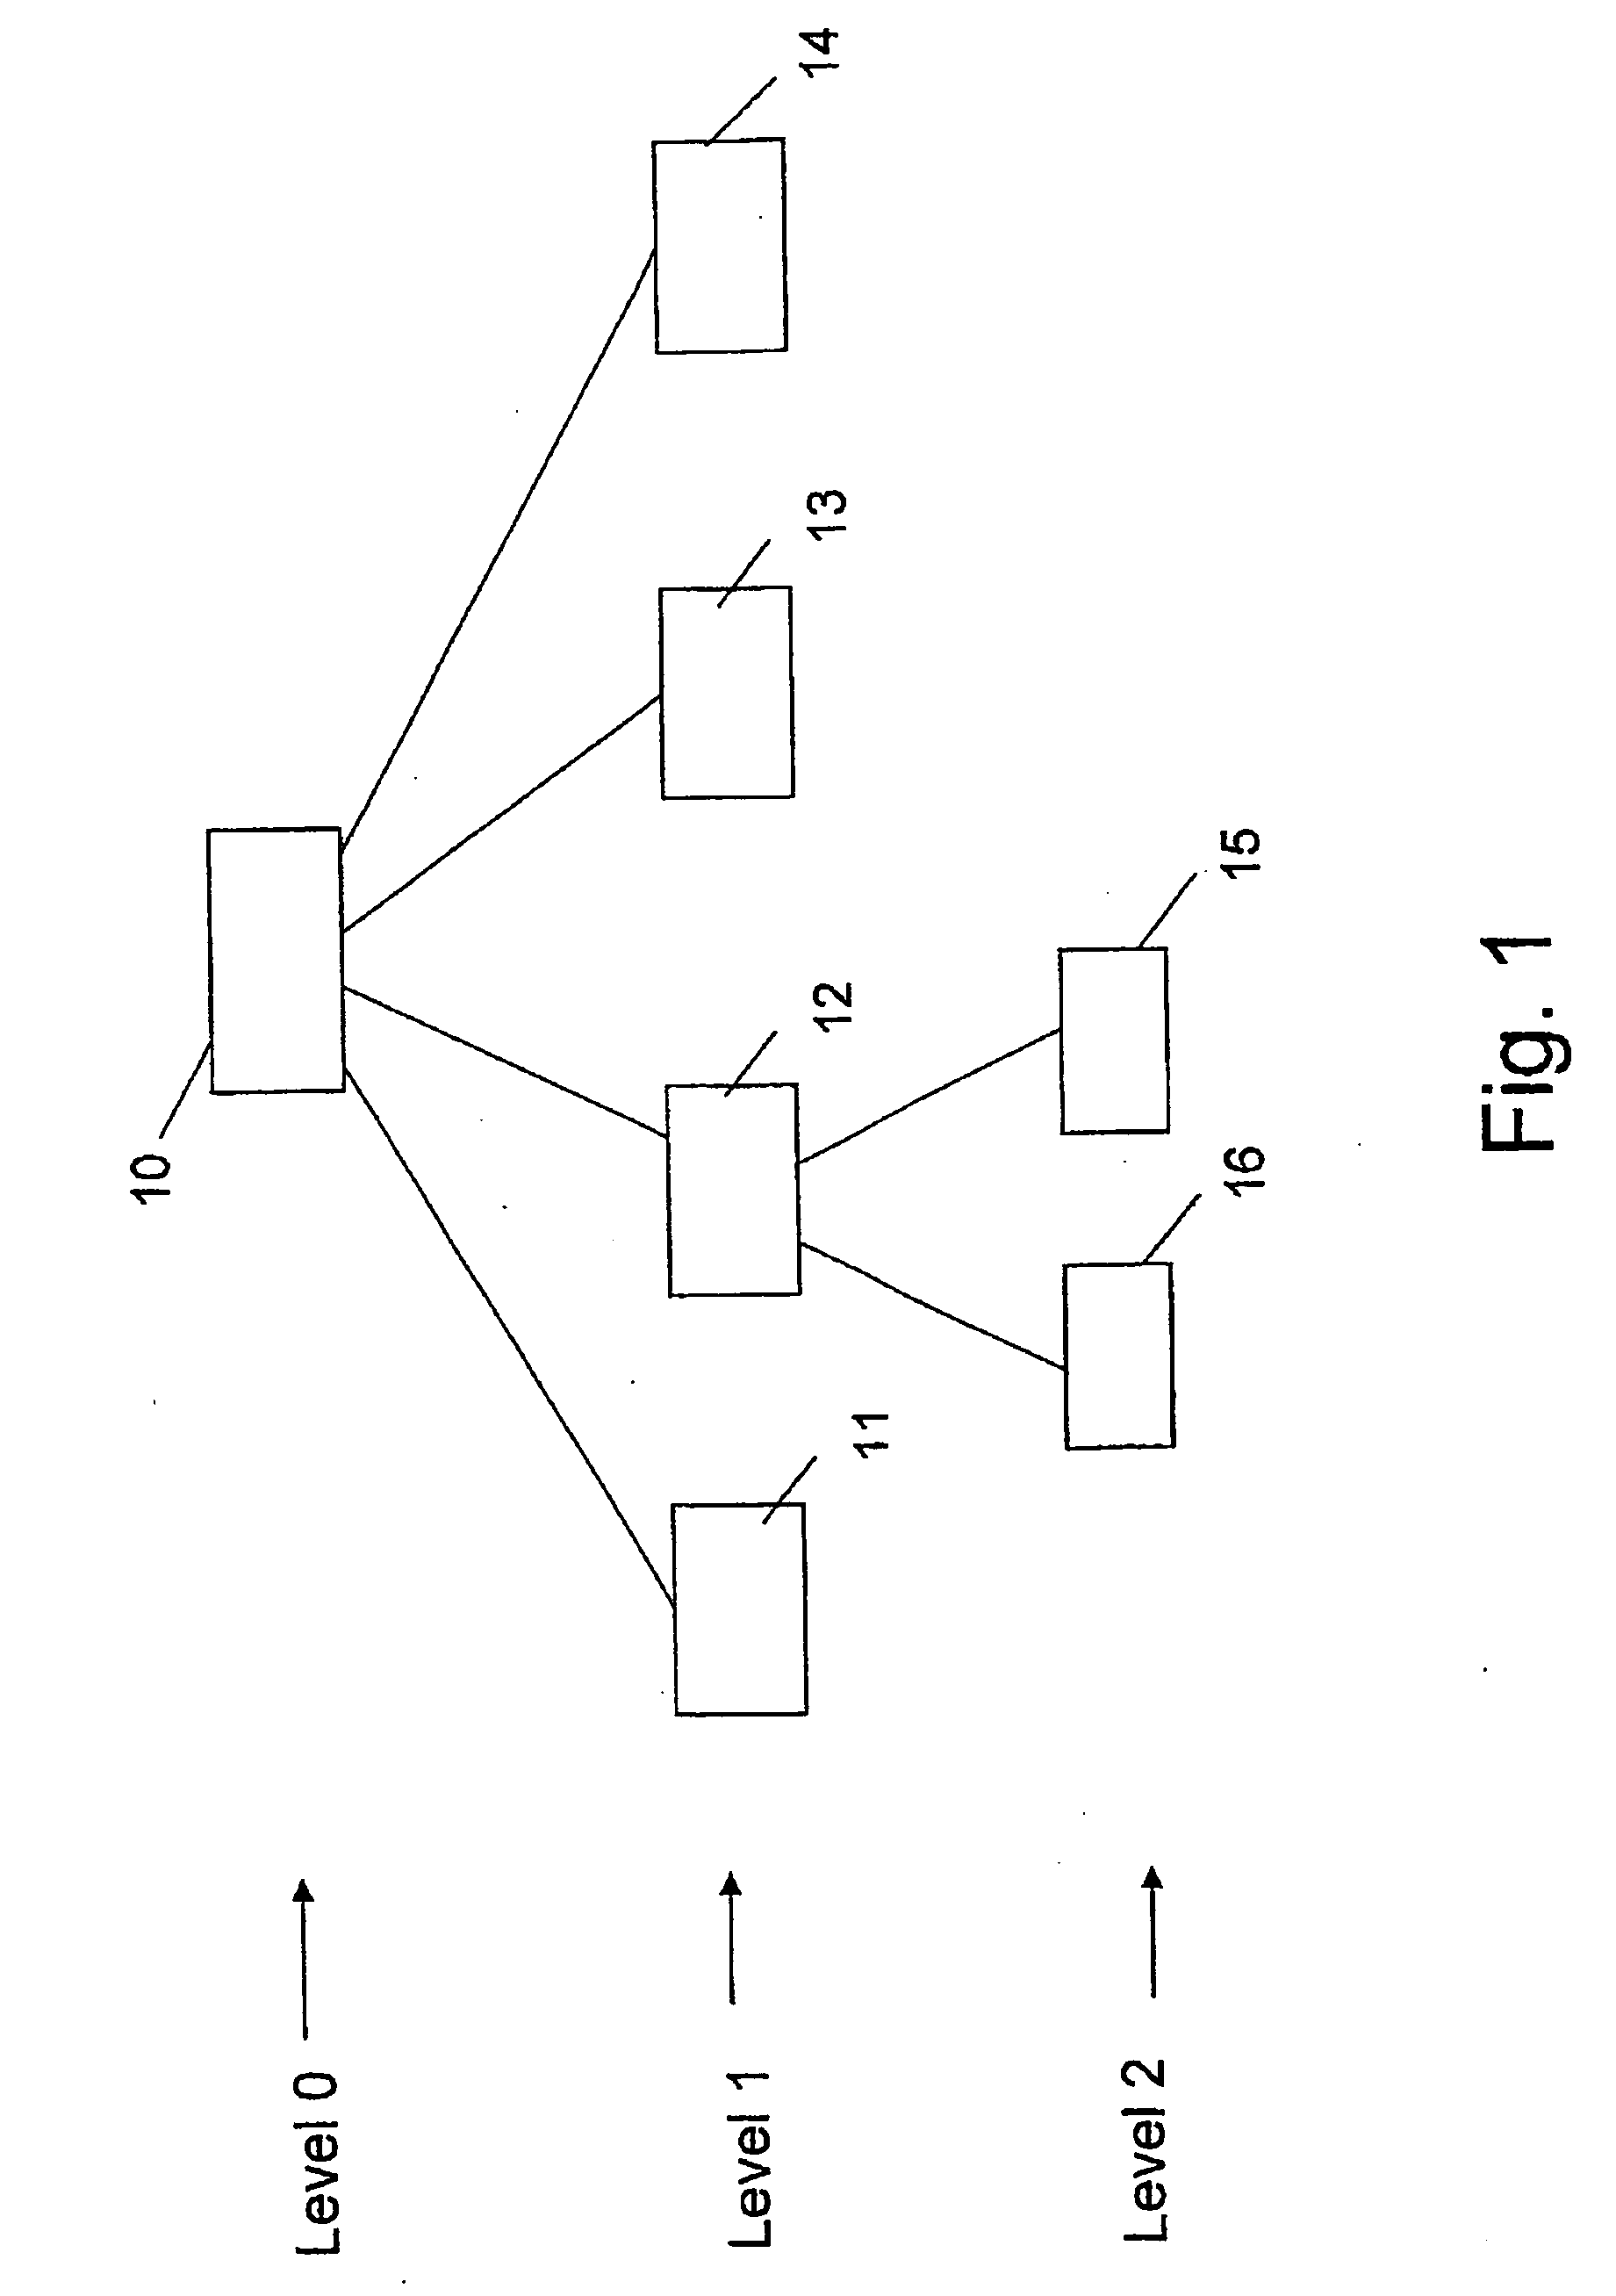 Method for dynamically allocating and managing resources in a computerized system having multiple consumers